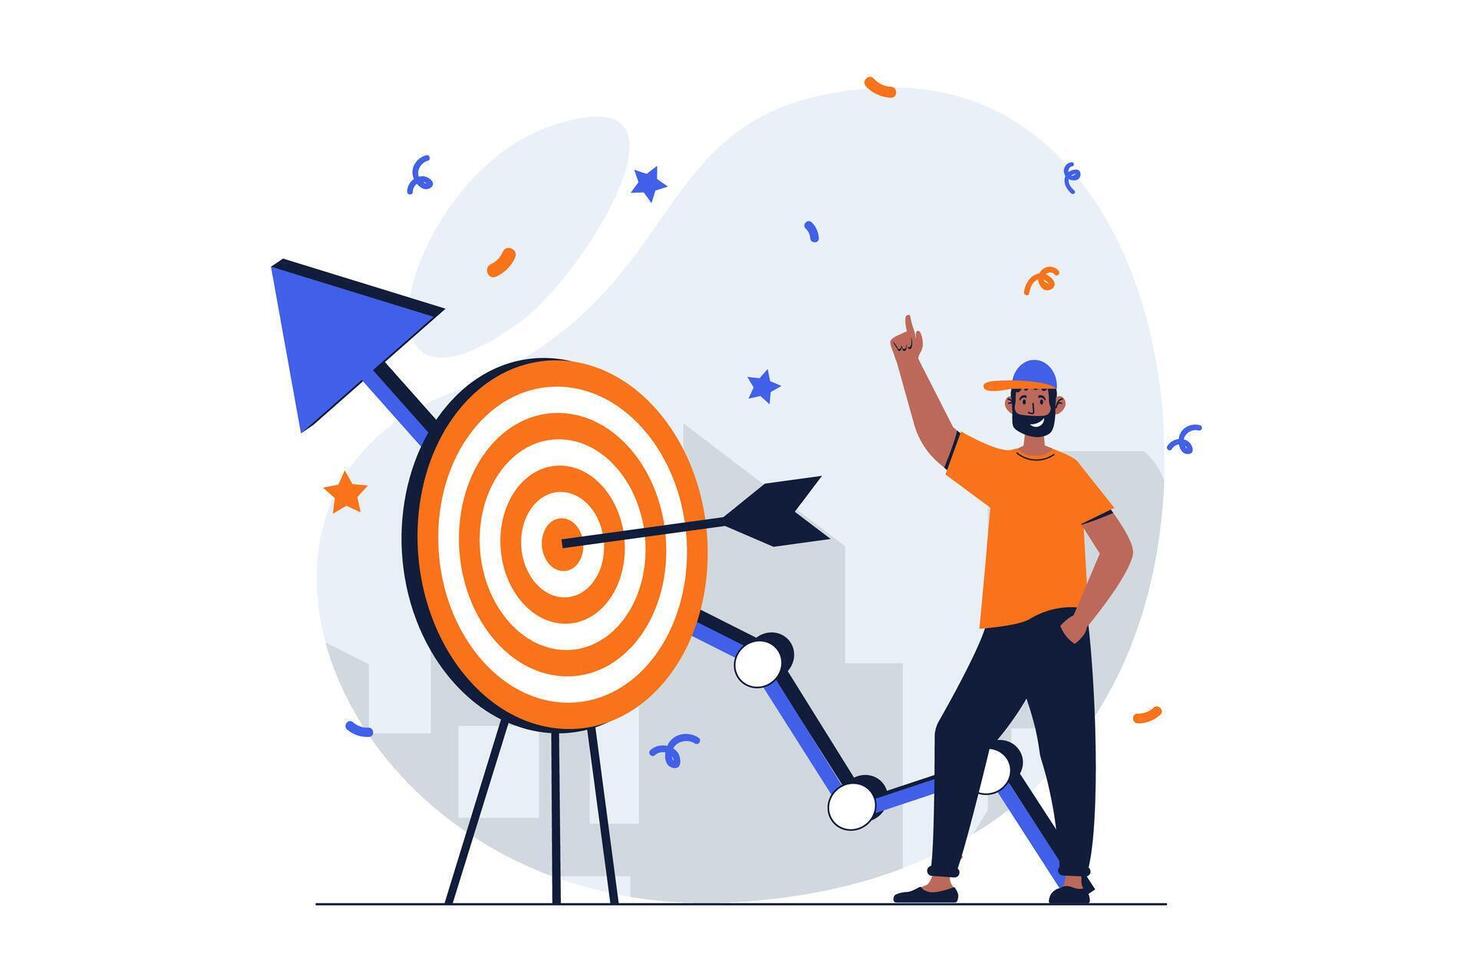 Business success web concept with character scene. Man hits target, celebrates increase in sales and profits. People situation in flat design. Vector illustration for social media marketing material.